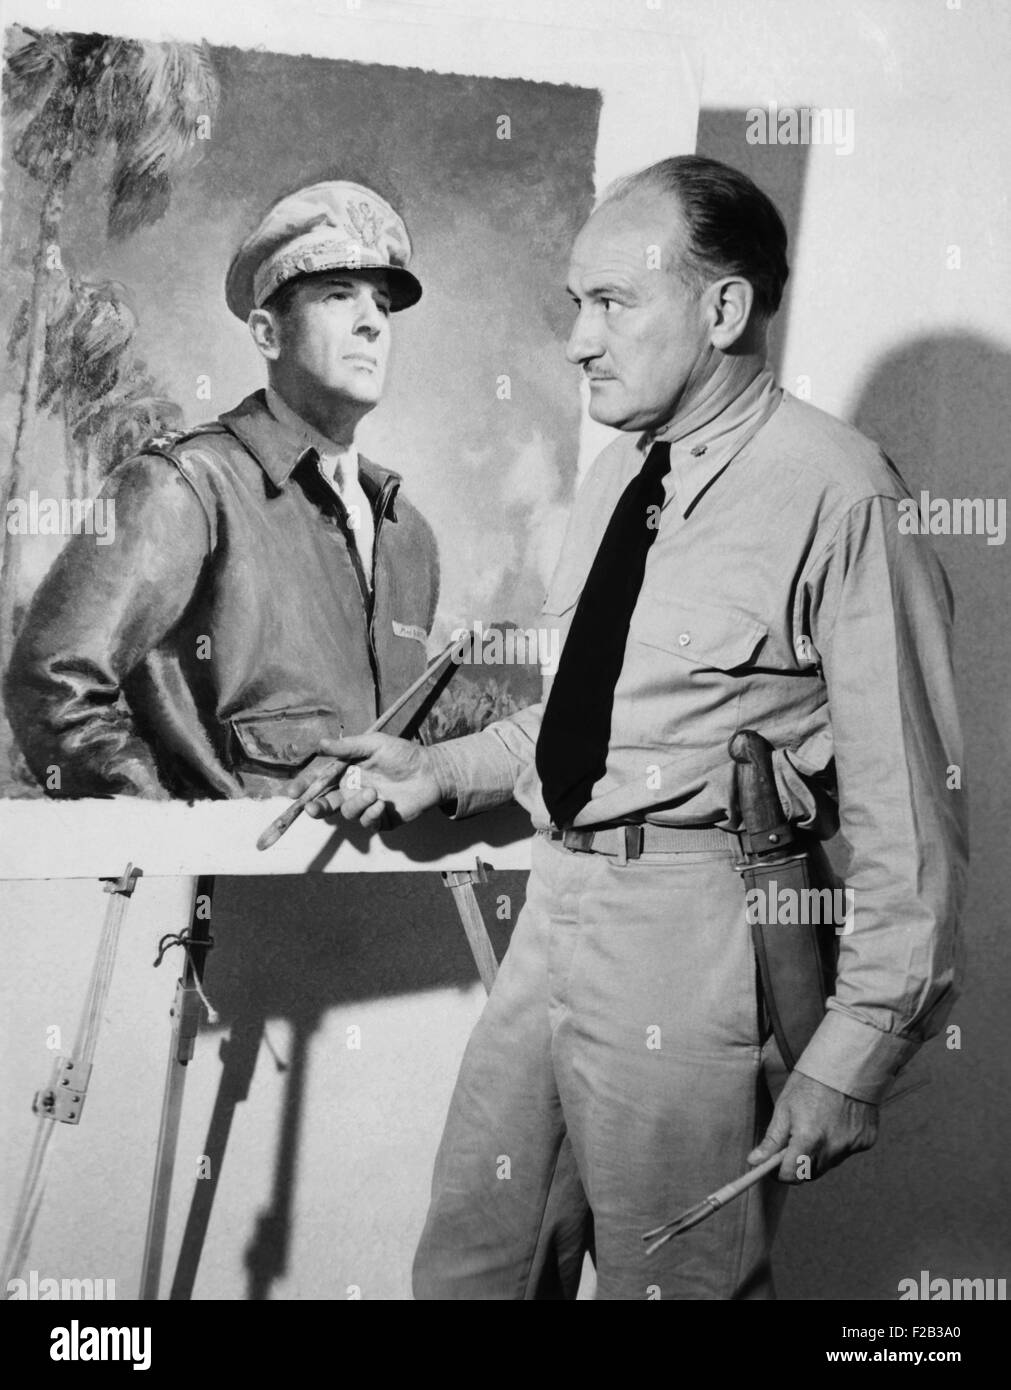 Artist McClelland Barclay with his portrait of General Douglas MacArthur during World War II. In July 1943 he was killed when his ship was torpedoed in the Solomon Islands. He had gone into the combat to sketch the battle action. - (CSU 2015 6 218) Stock Photo